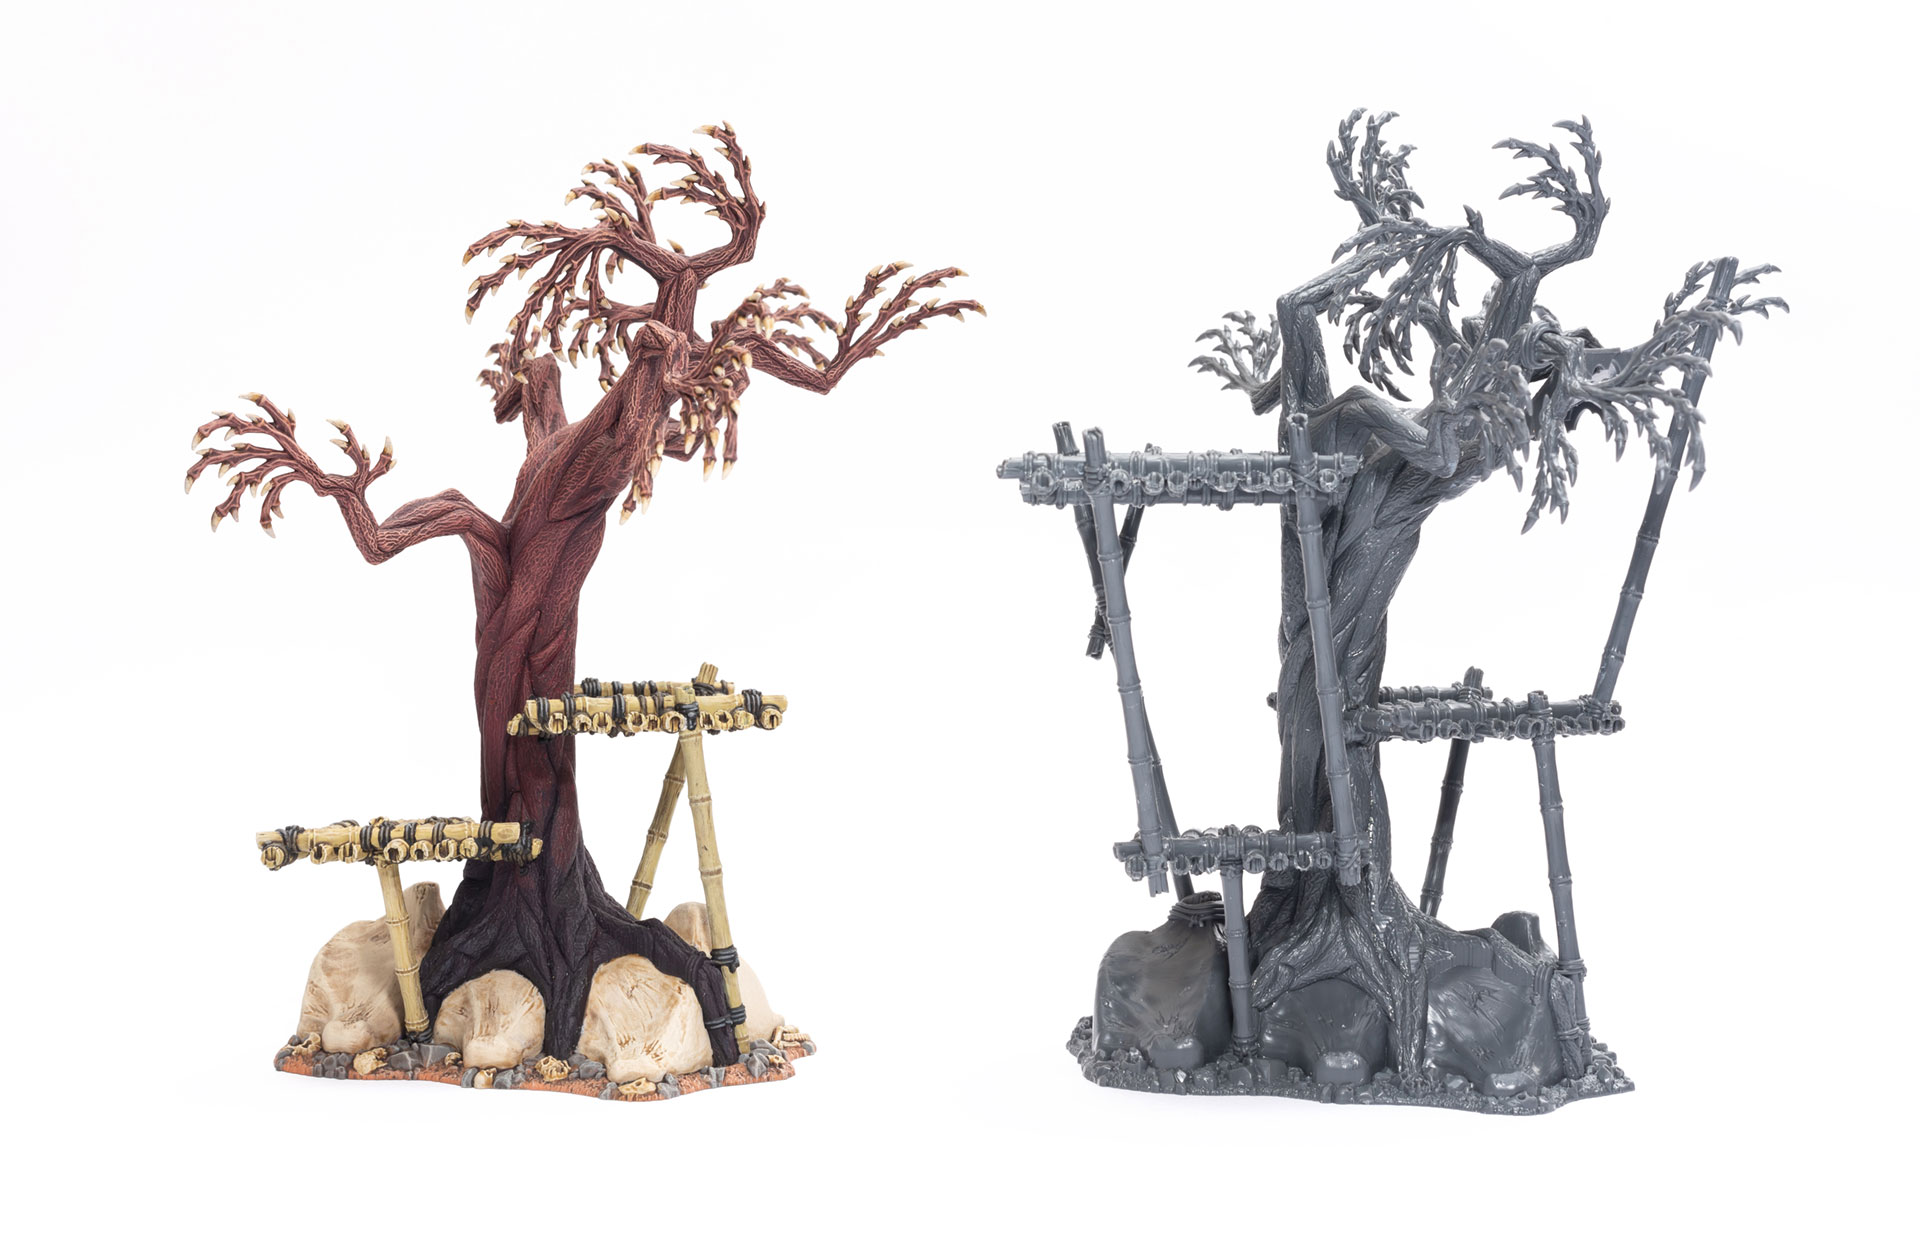 Gnarlwood terrain from Warcry Sundered Fate